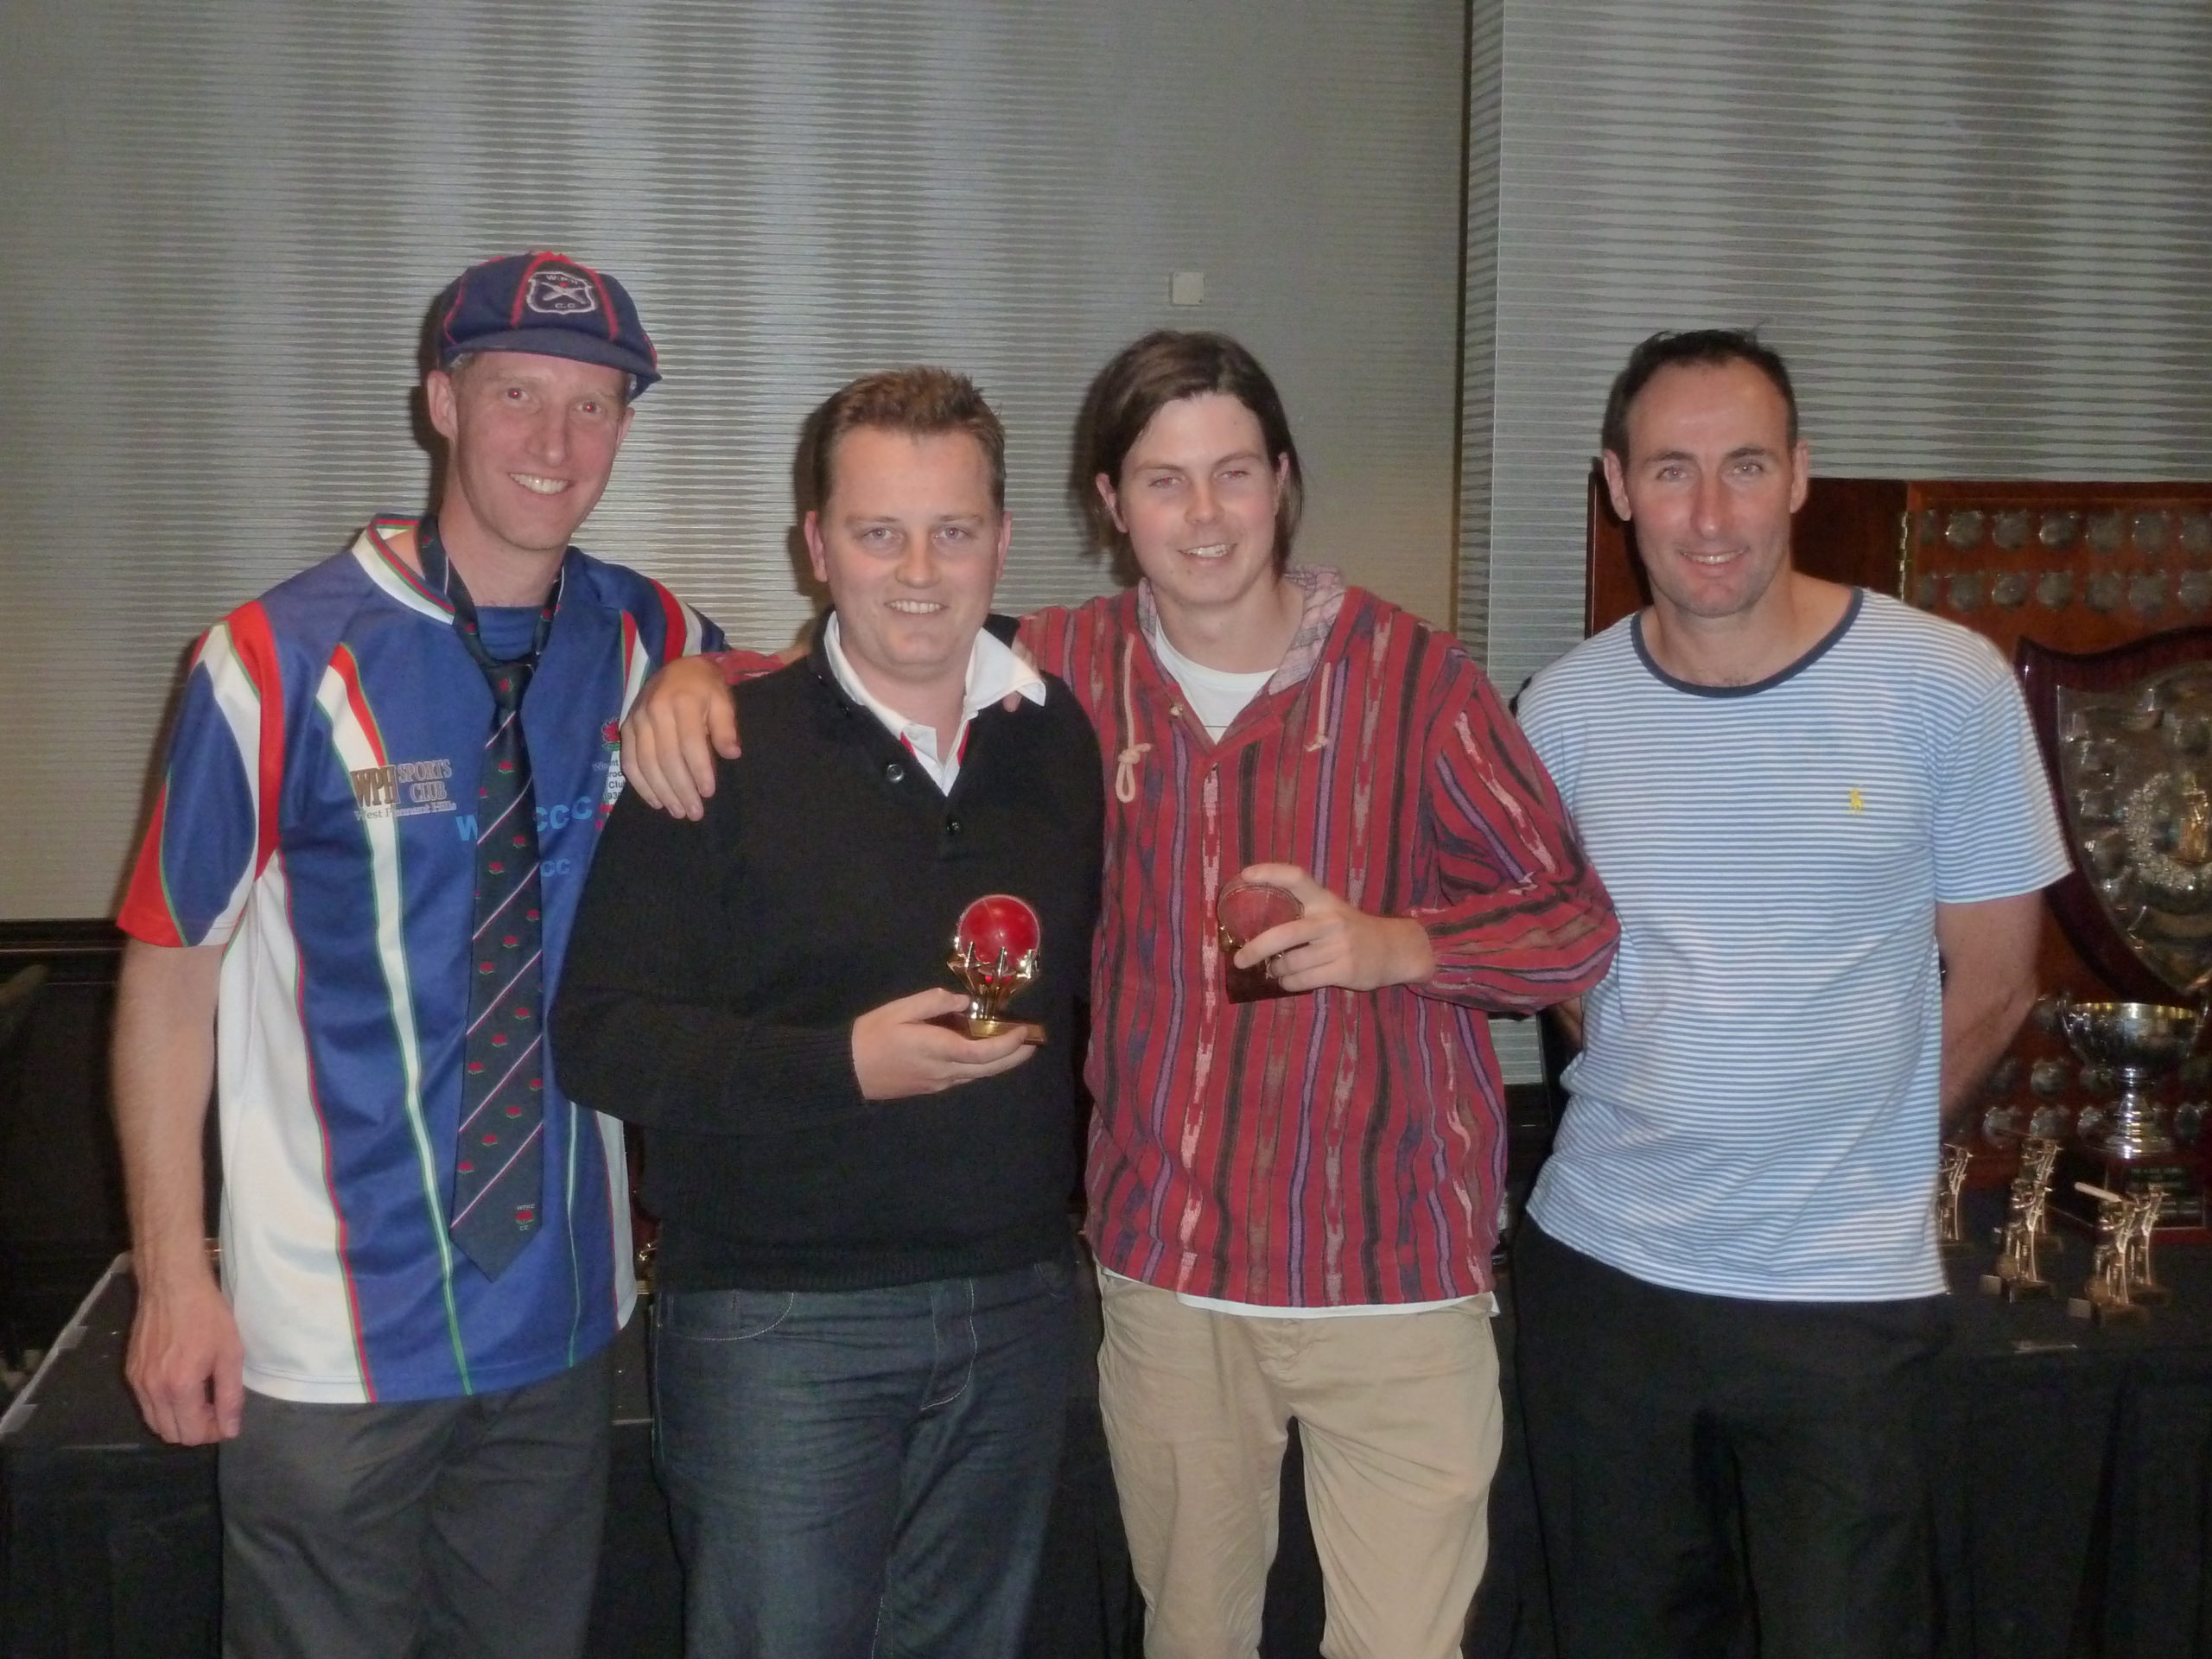 Peter Stott (150 wickets) and Riley Miedler (200 wickets) - 2014/15 season.